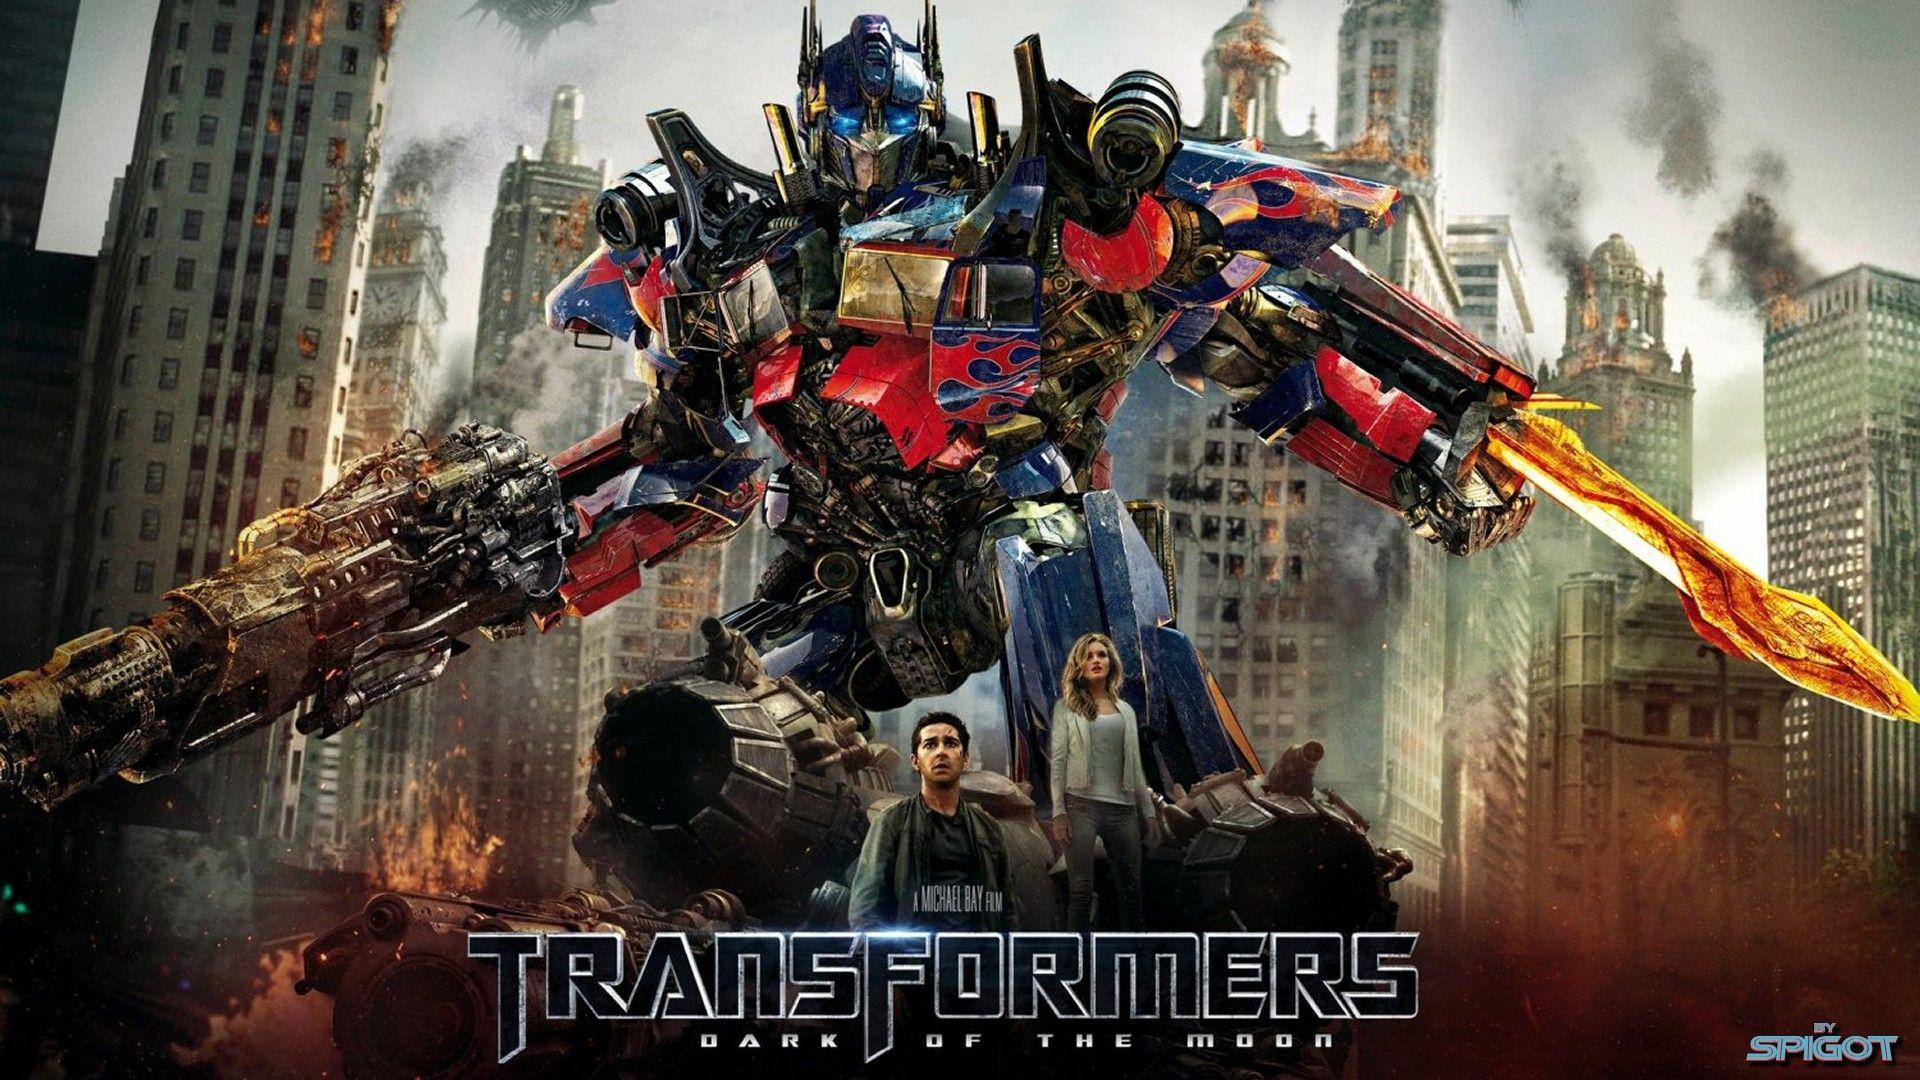 Download Transformers wallpapers for mobile phone free Transformers HD  pictures